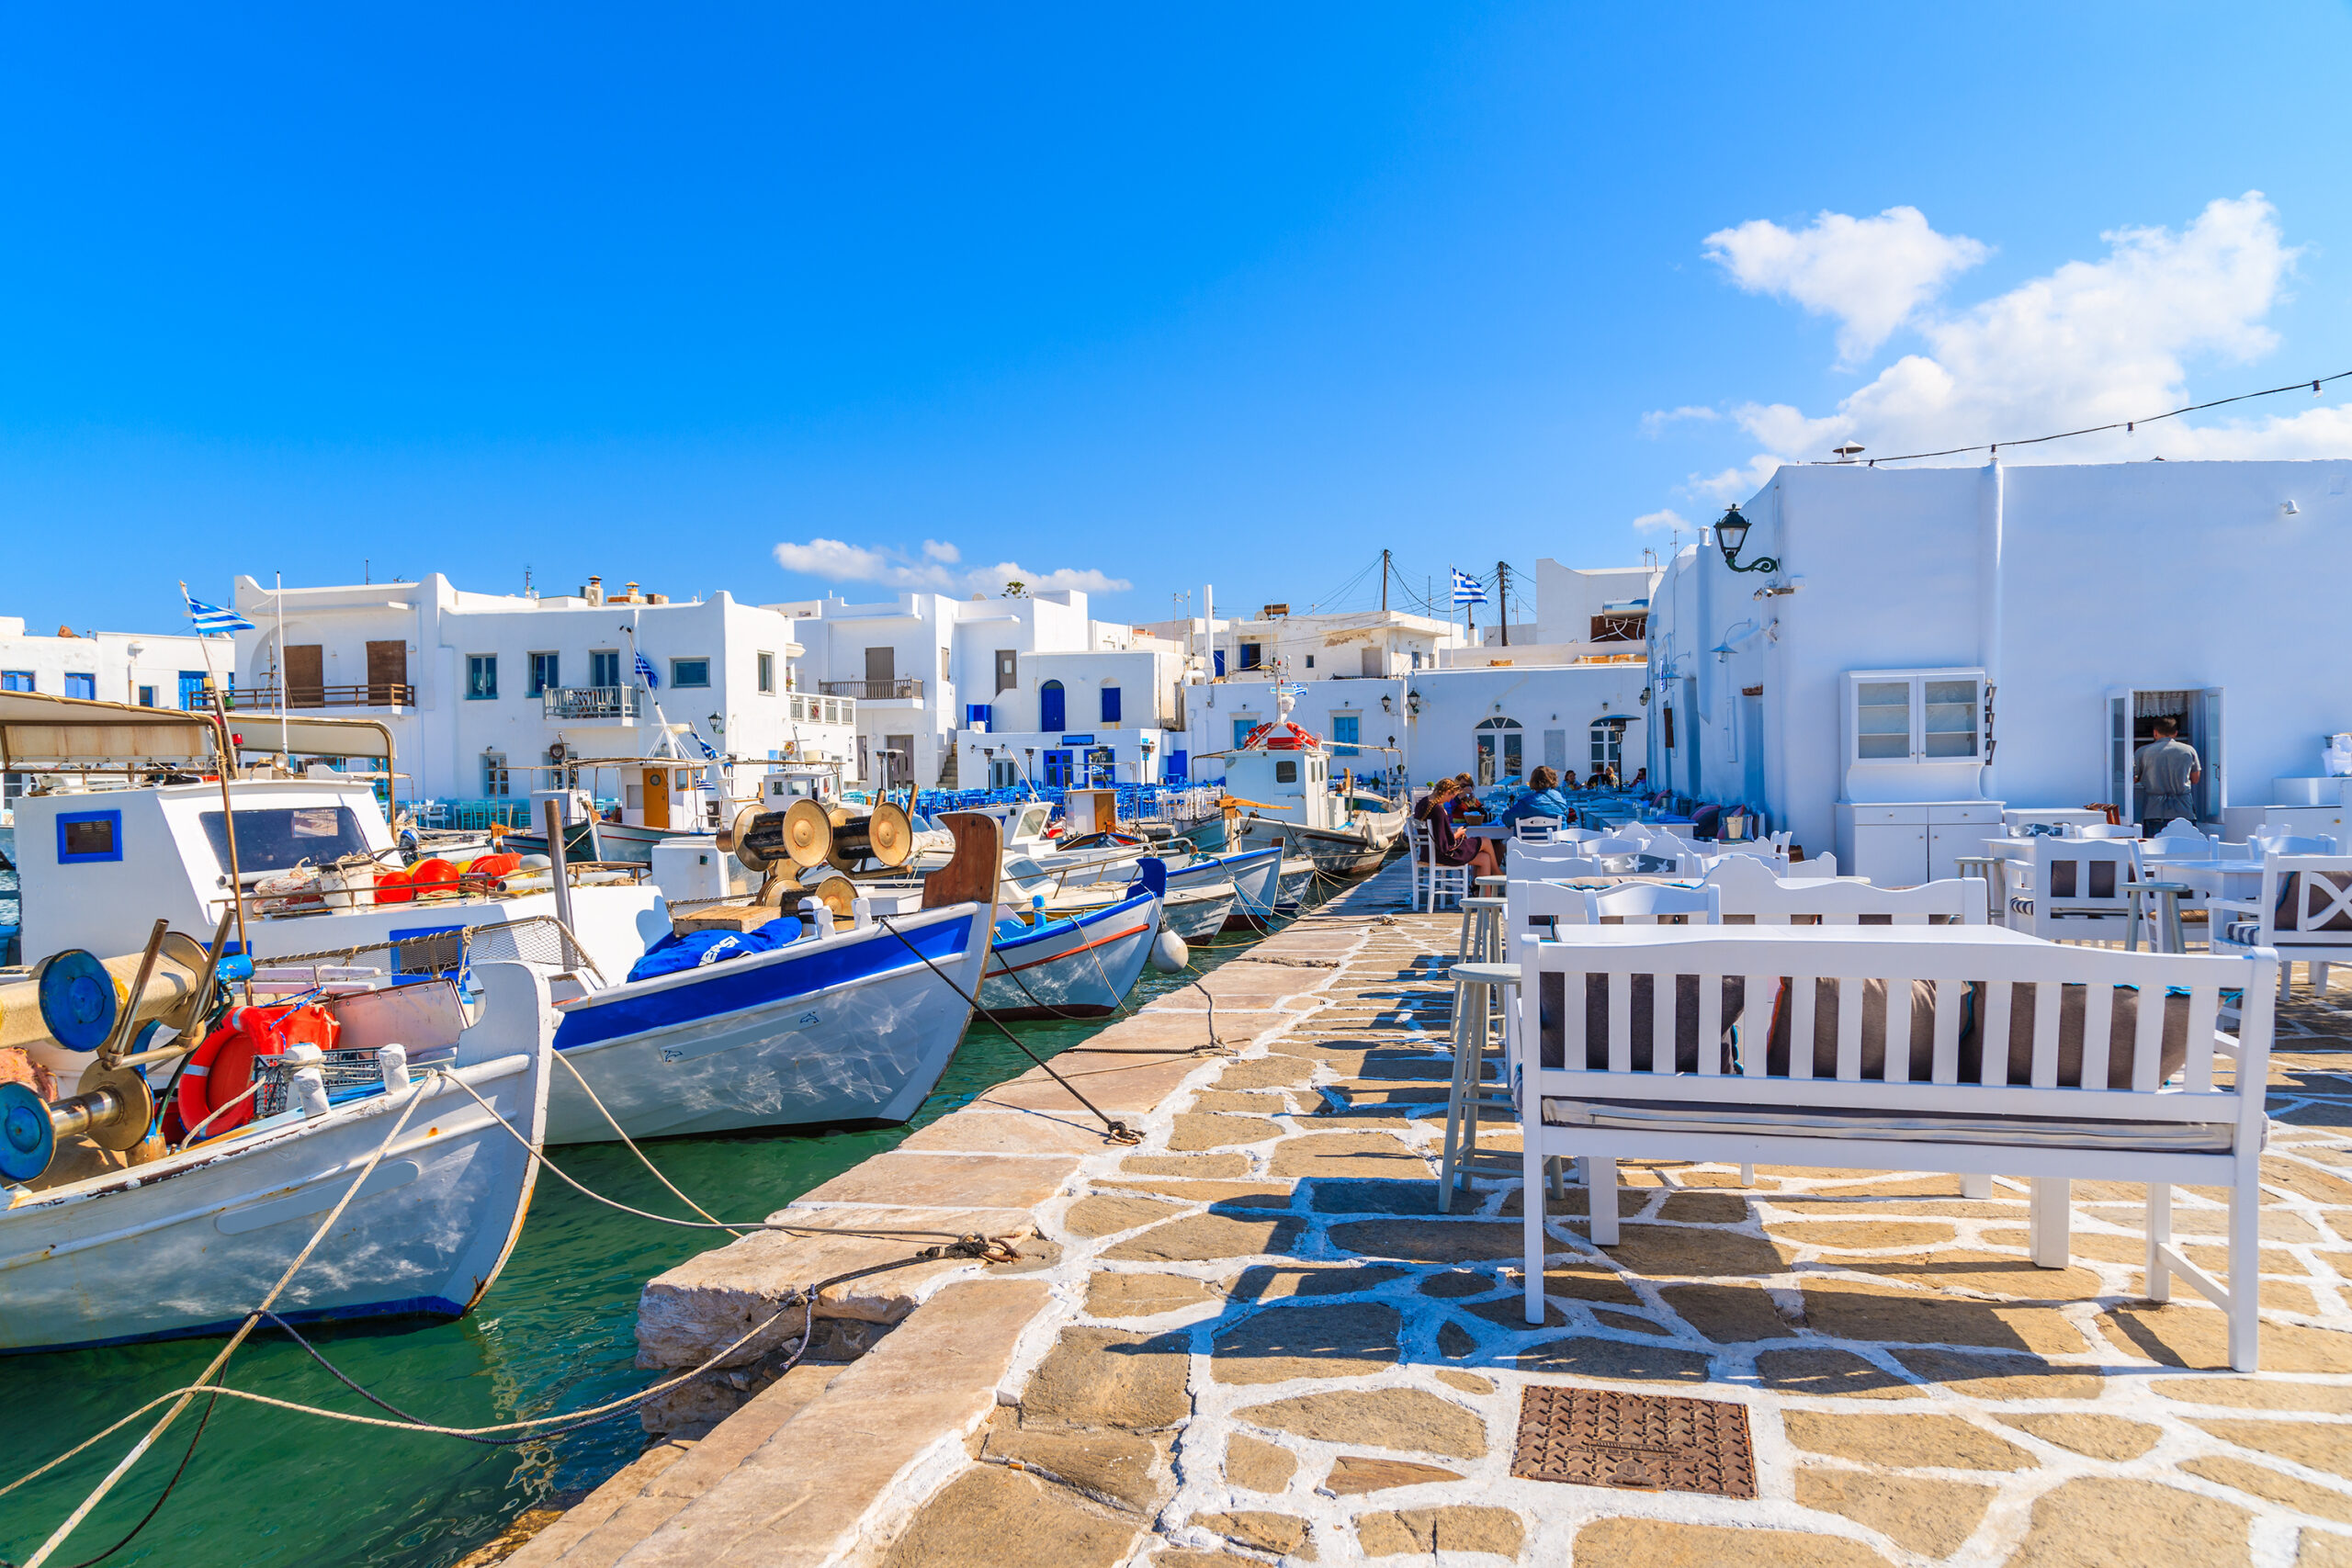 ACV offers a taste of the Greek life as Europe bookings soar: “Booking early is key”